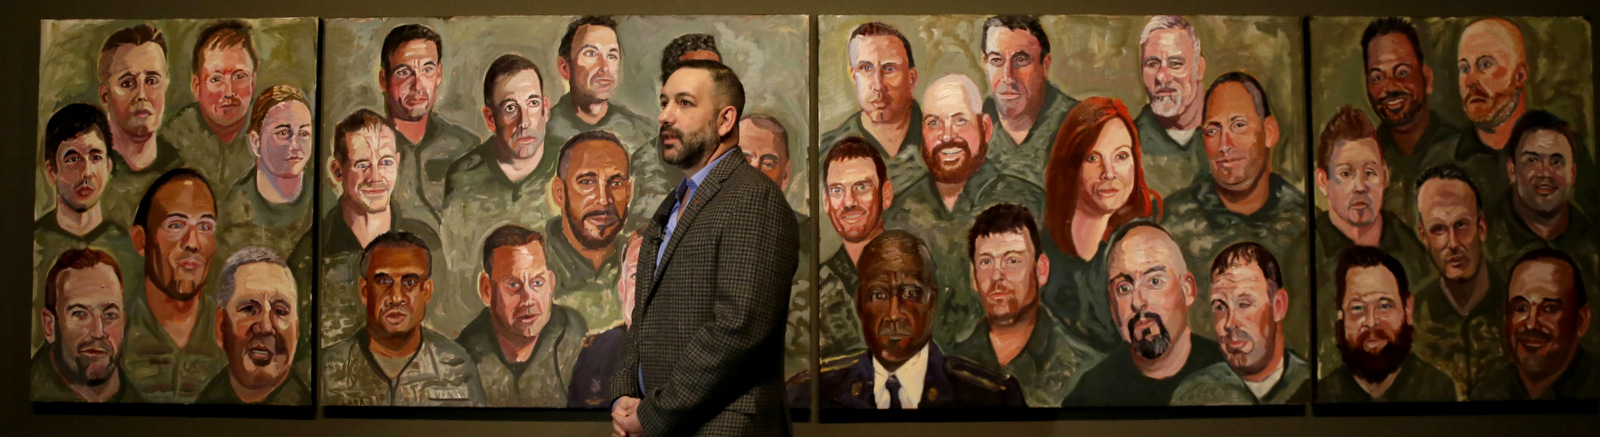 Military veteran Robert Ferrara talks in front of a mural painted by Former President George W Bush during a press preview of an exhibition of Bush's paintings of veterans in Dallas, Tuesday, Feb. 28, 2017.  (AP/LM Otero)